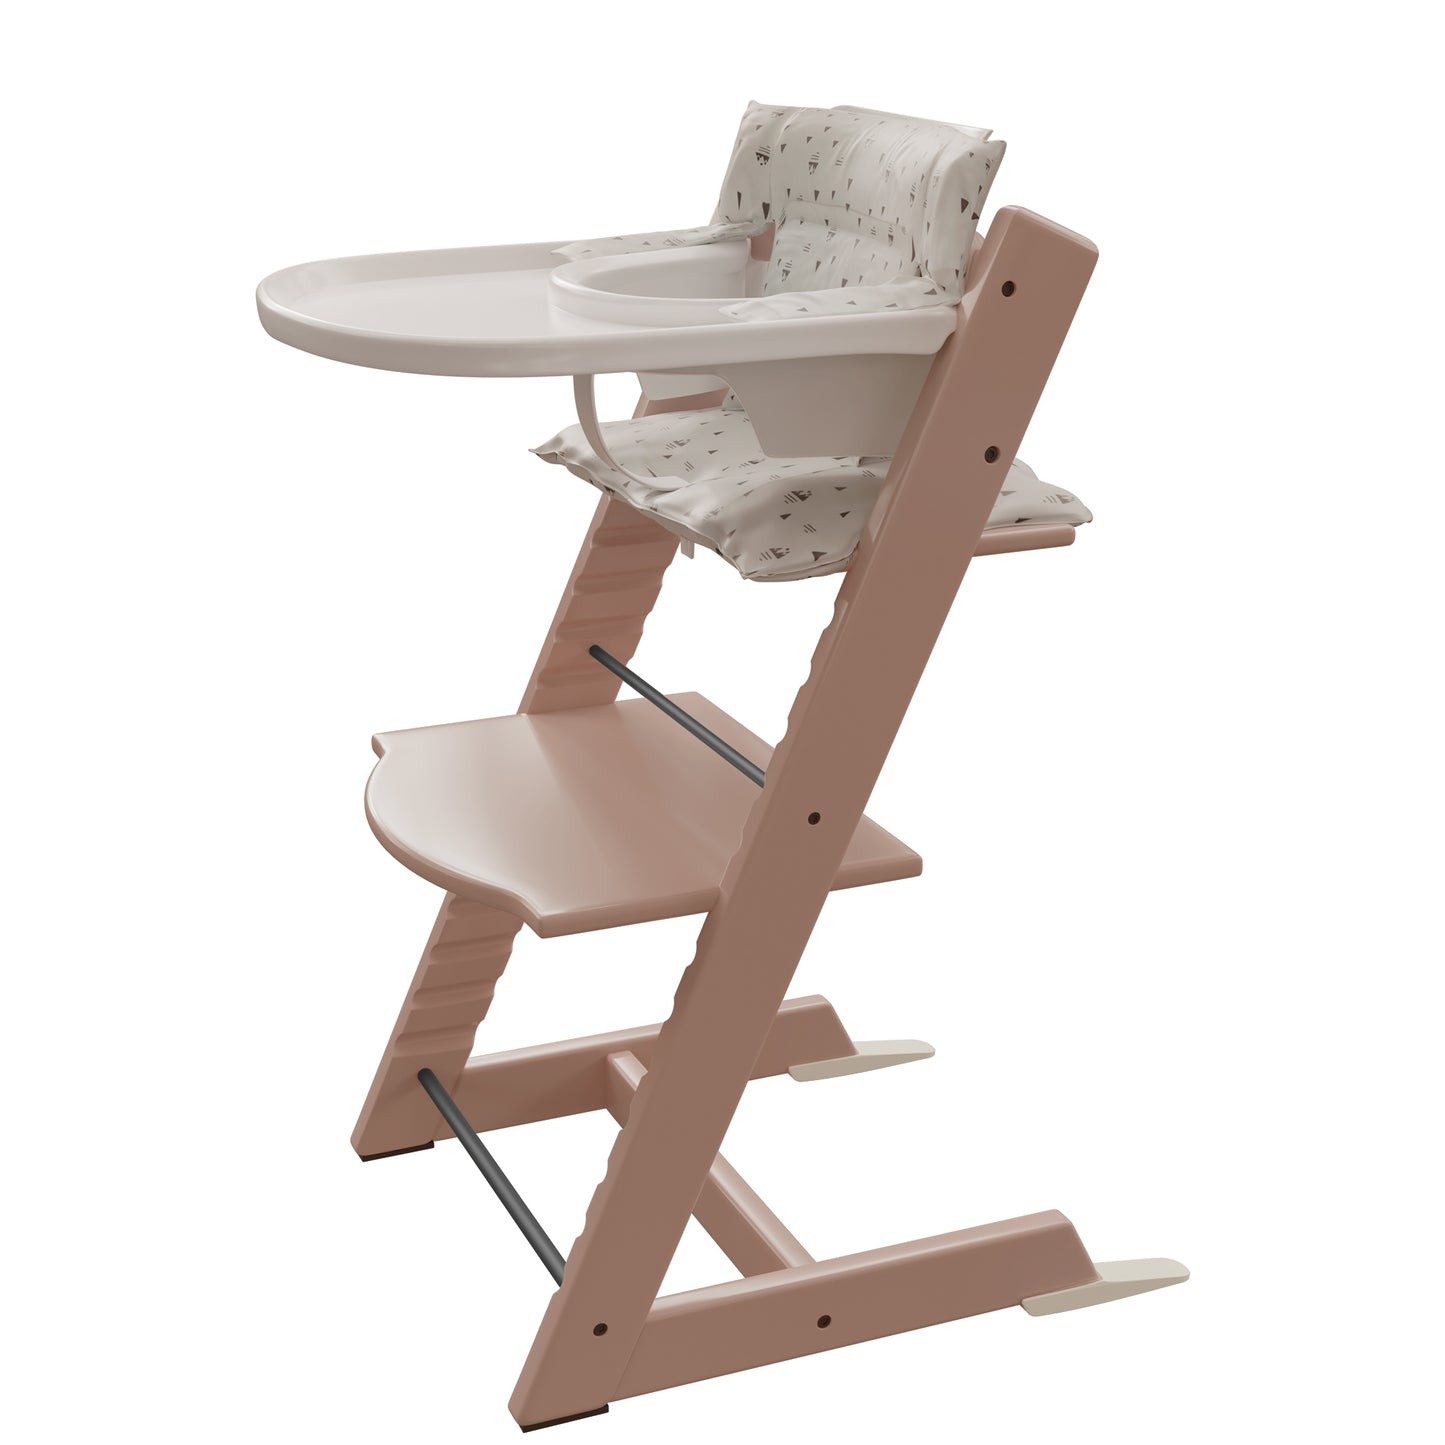 Adjustable solid wood beech baby dining chair detachable baby dinner plate baby multi-functional solid wood learning bench